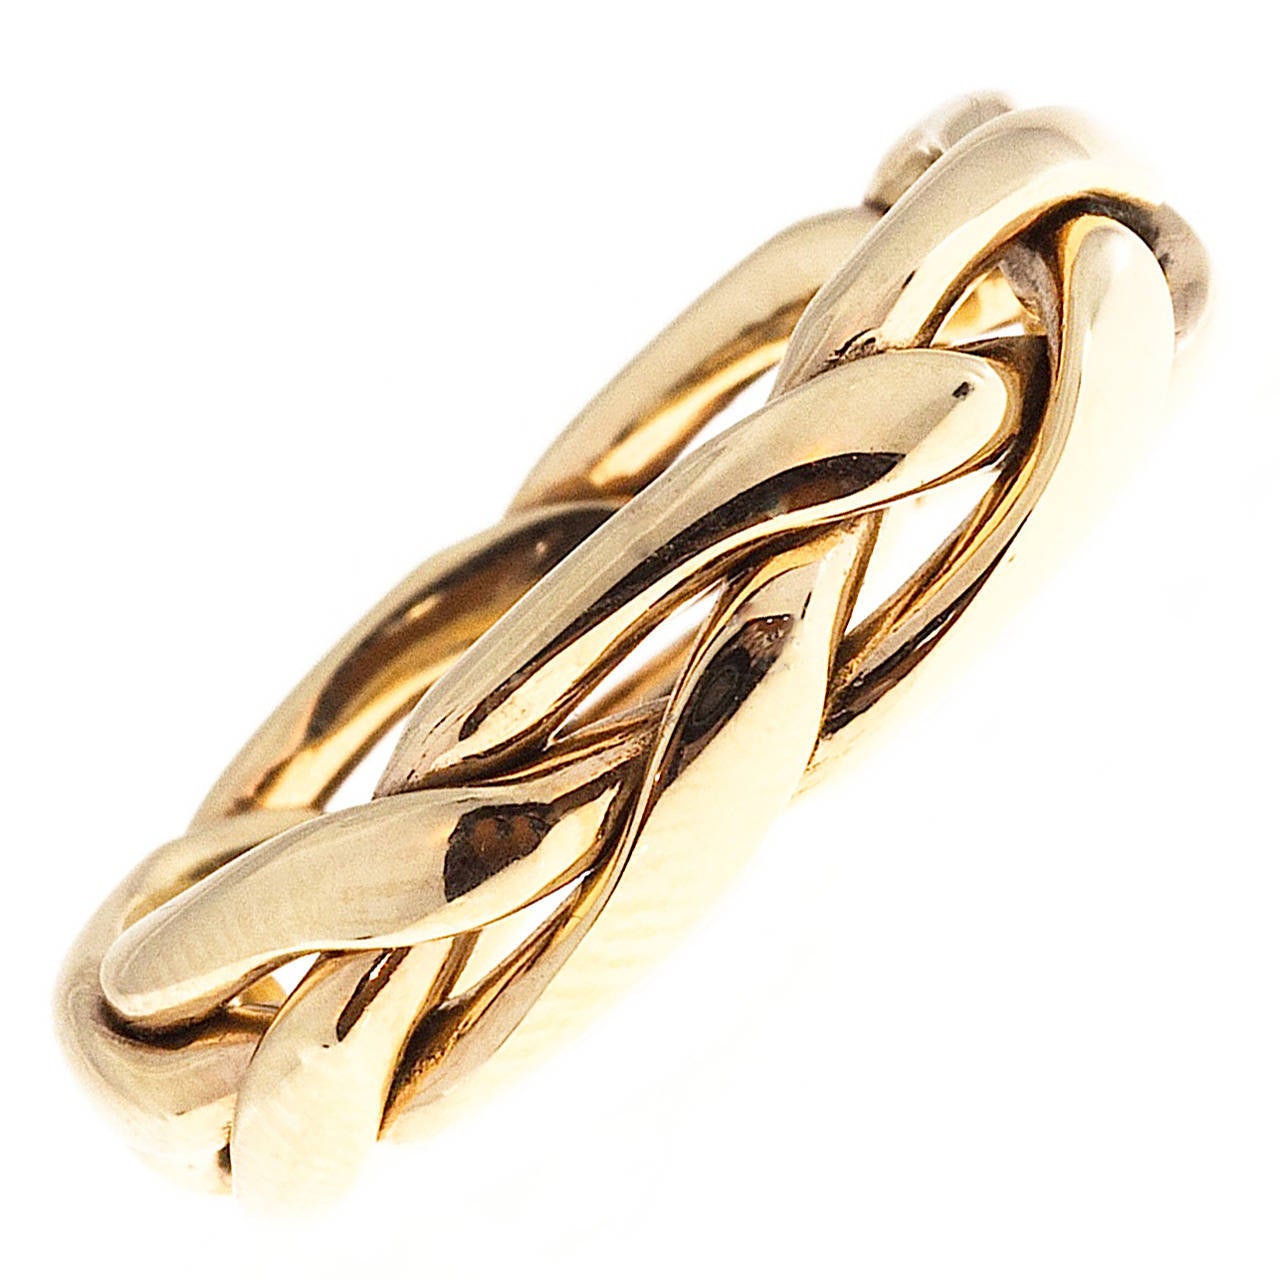 Samuel Jewels Hand Wrapped Woven Three Row Gold Wedding Ring